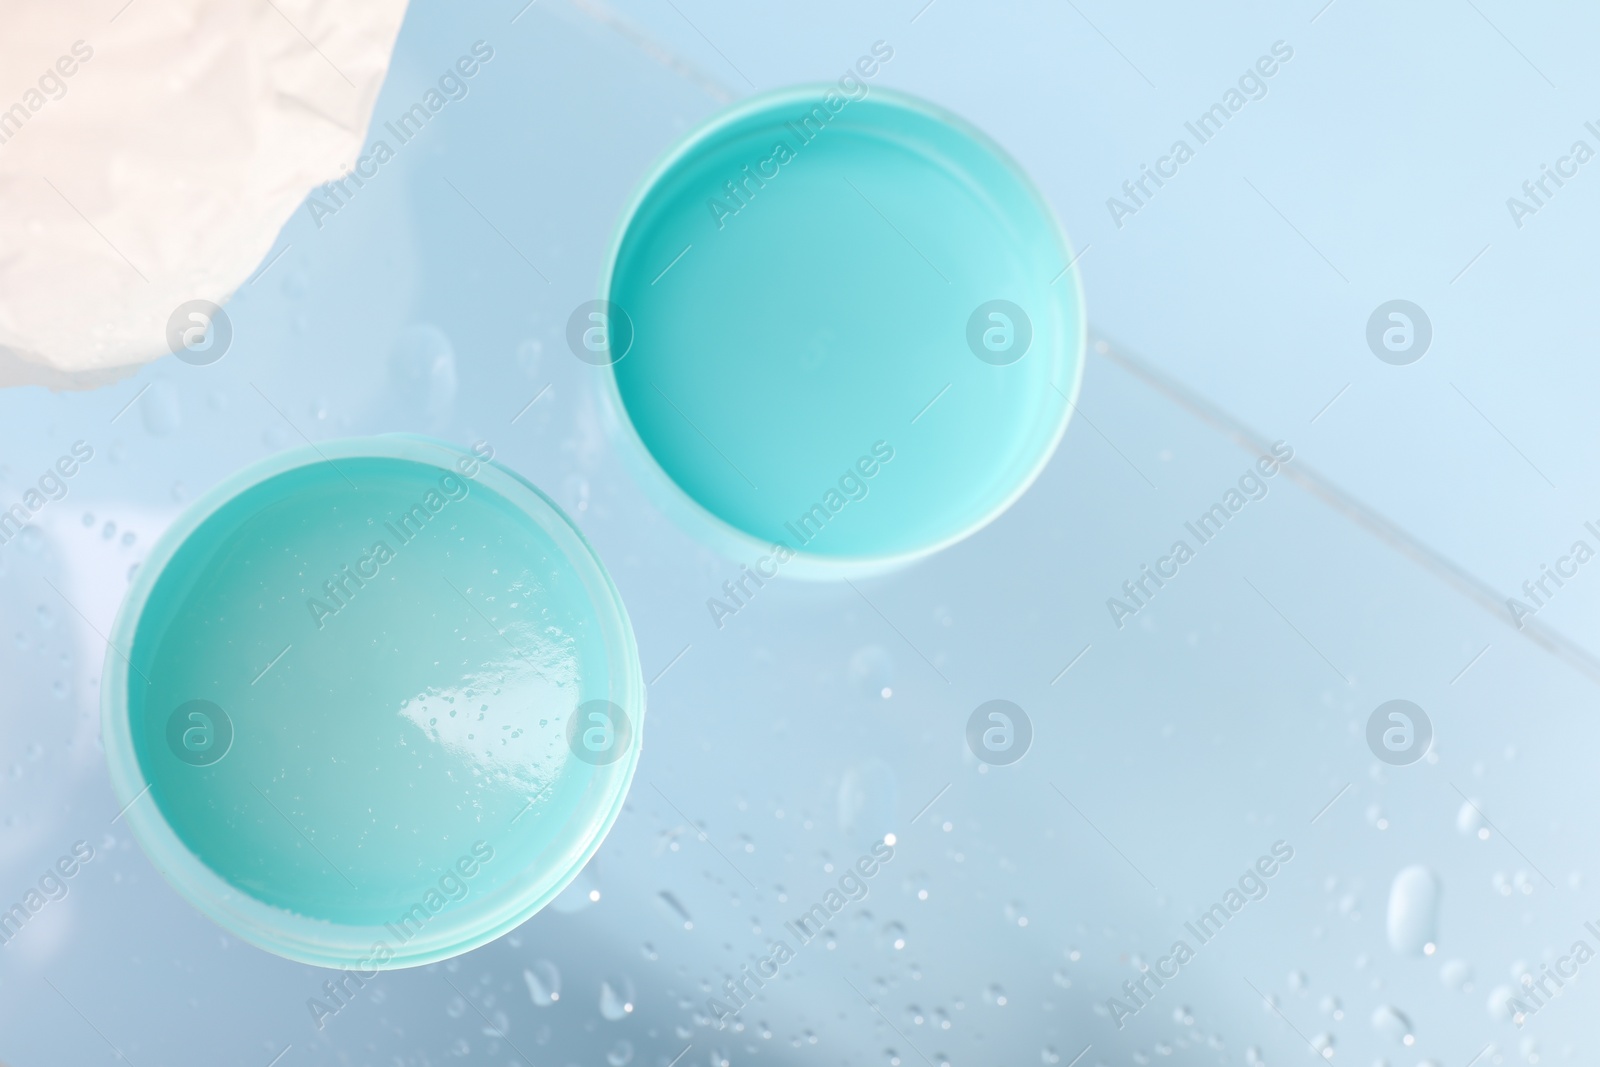 Photo of Lip balm and water drops on glass surface, flat lay